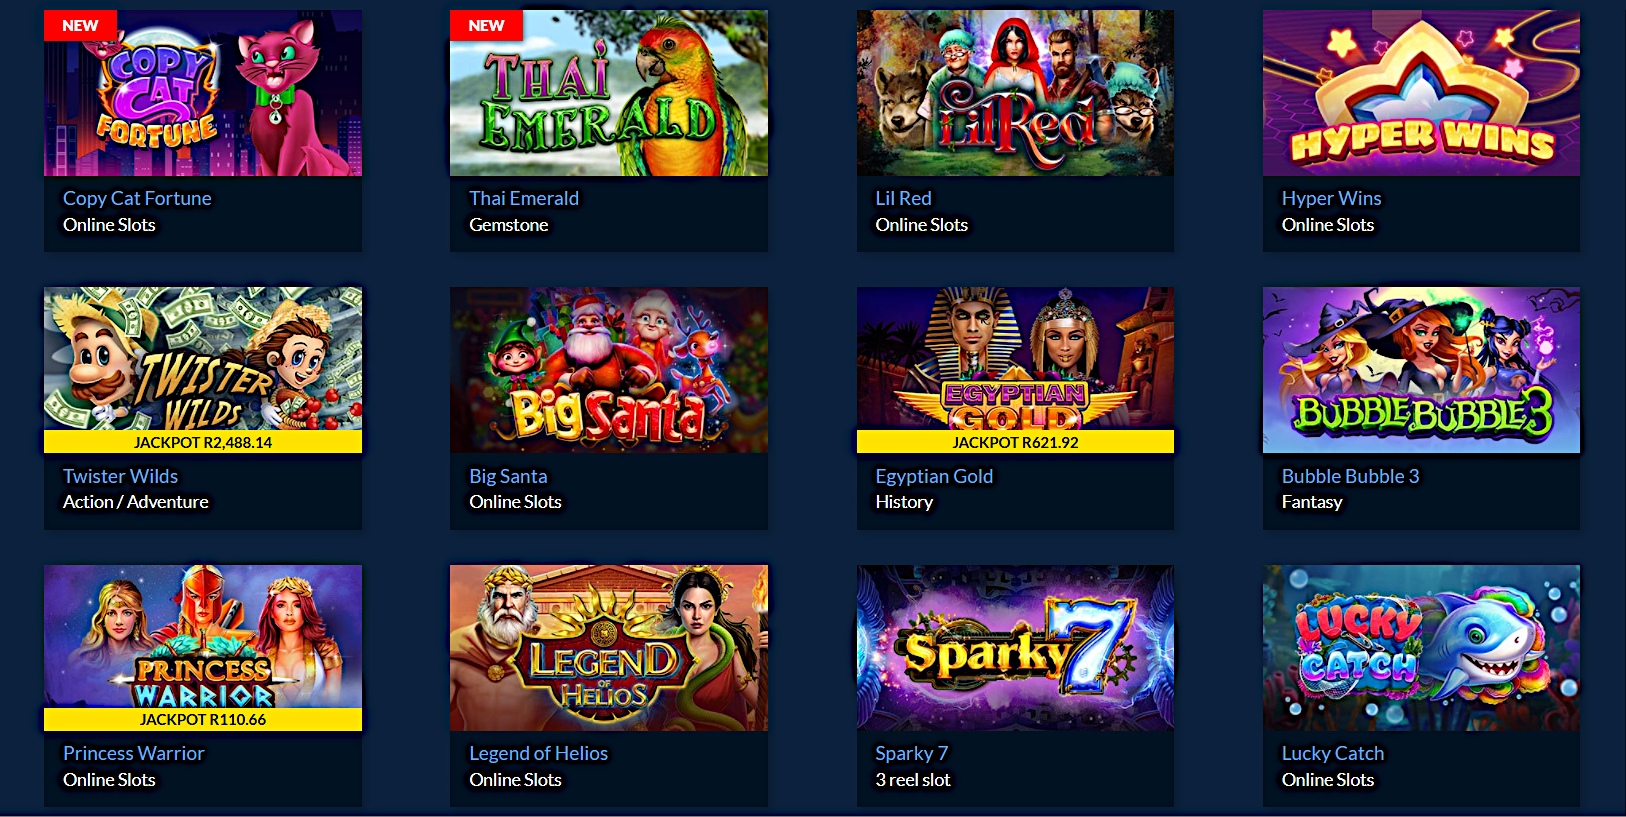 Punt Casino South Africa offers over 200 top-quality casino games with online slots, crypto table games, and specialty casino games on the menu.